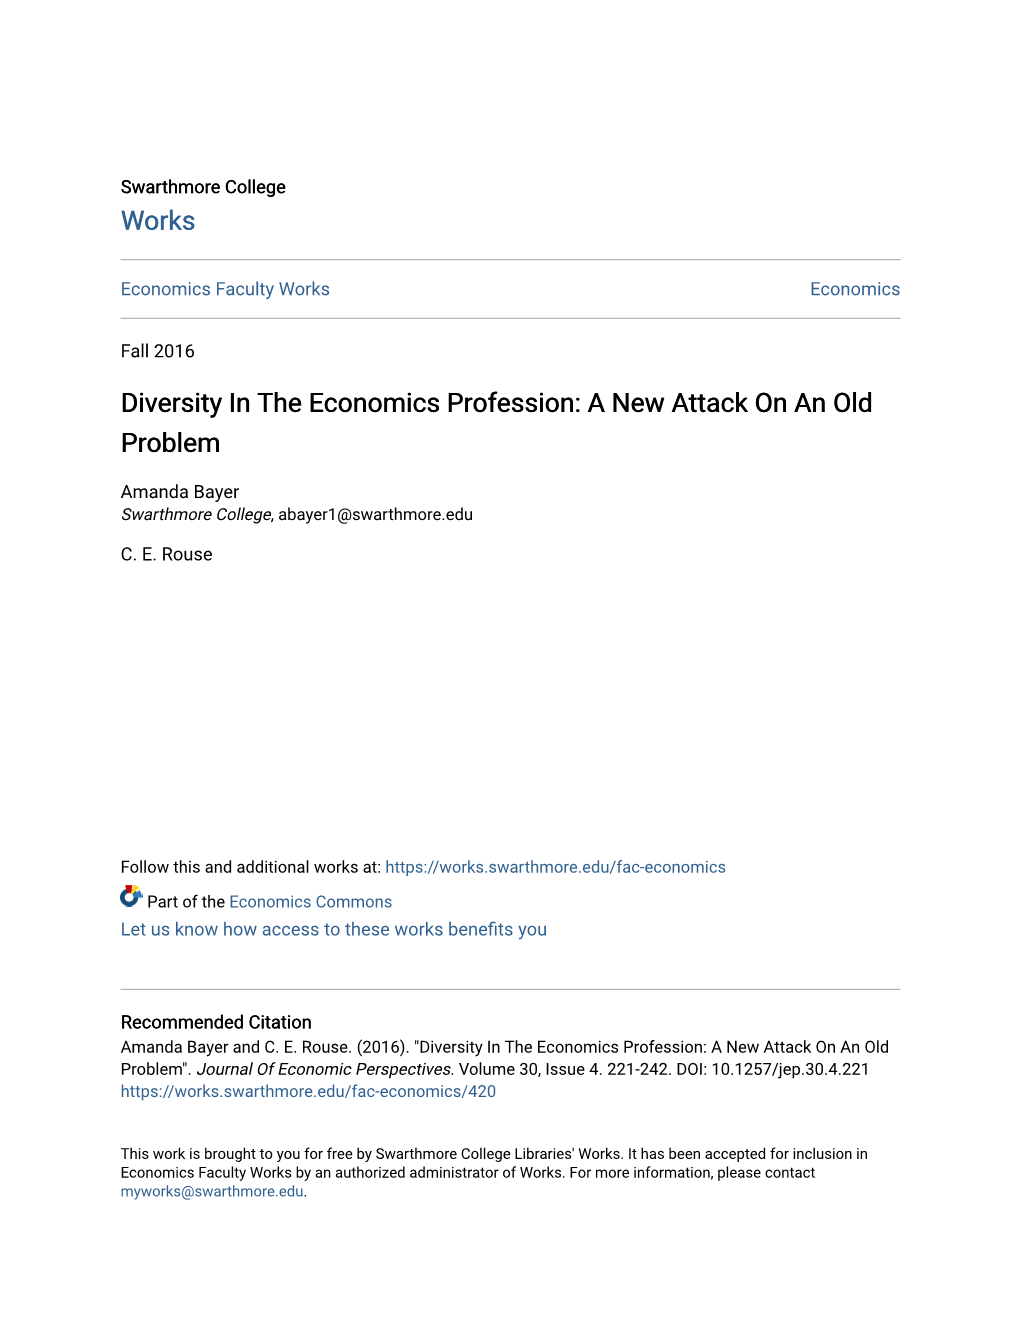 Diversity in the Economics Profession: a New Attack on an Old Problem